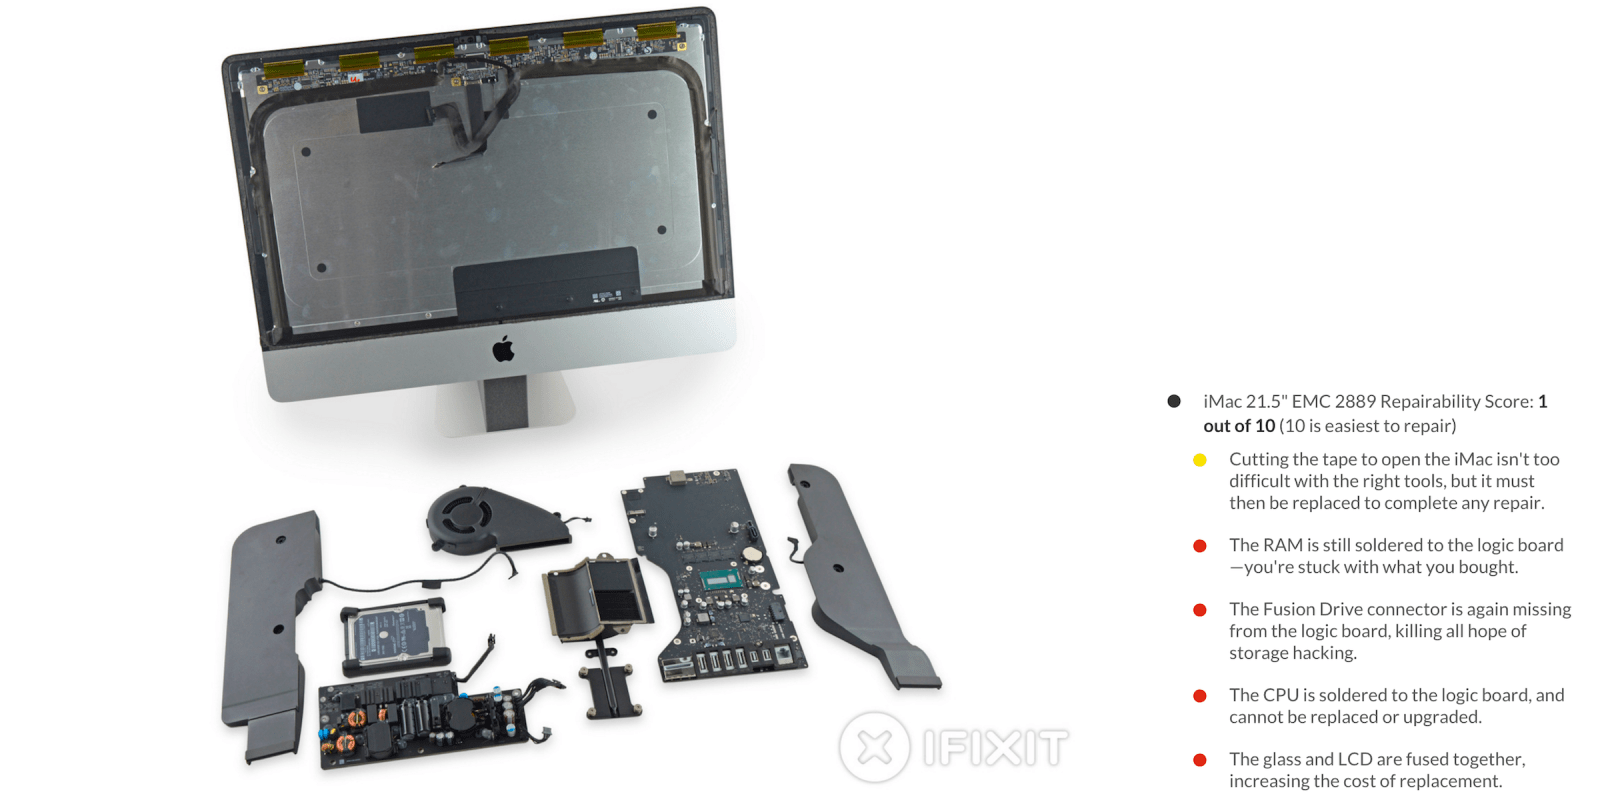 New 21.5-inch iMac least repairable yet due to lack RAM, hard upgradability - 9to5Mac